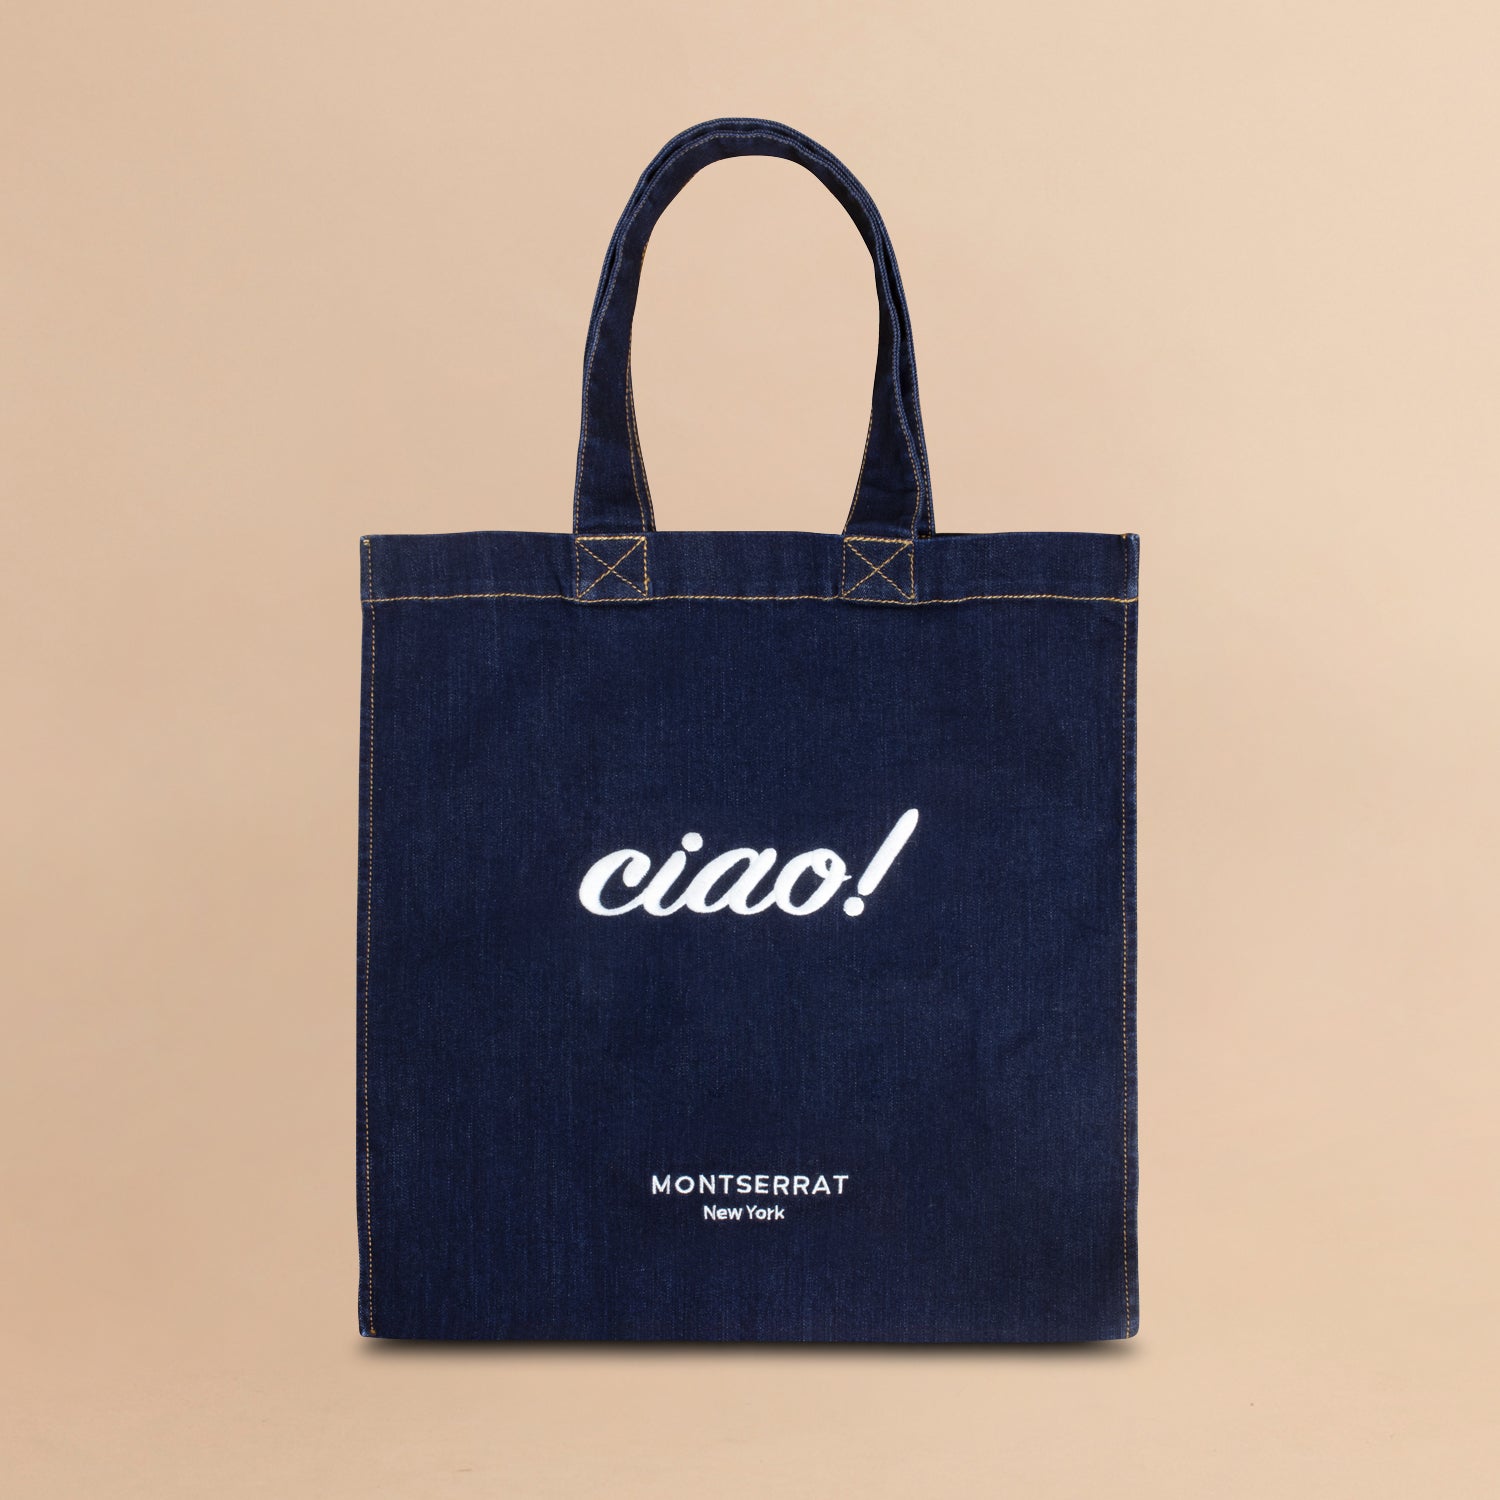 Picture of The Ciao Tote